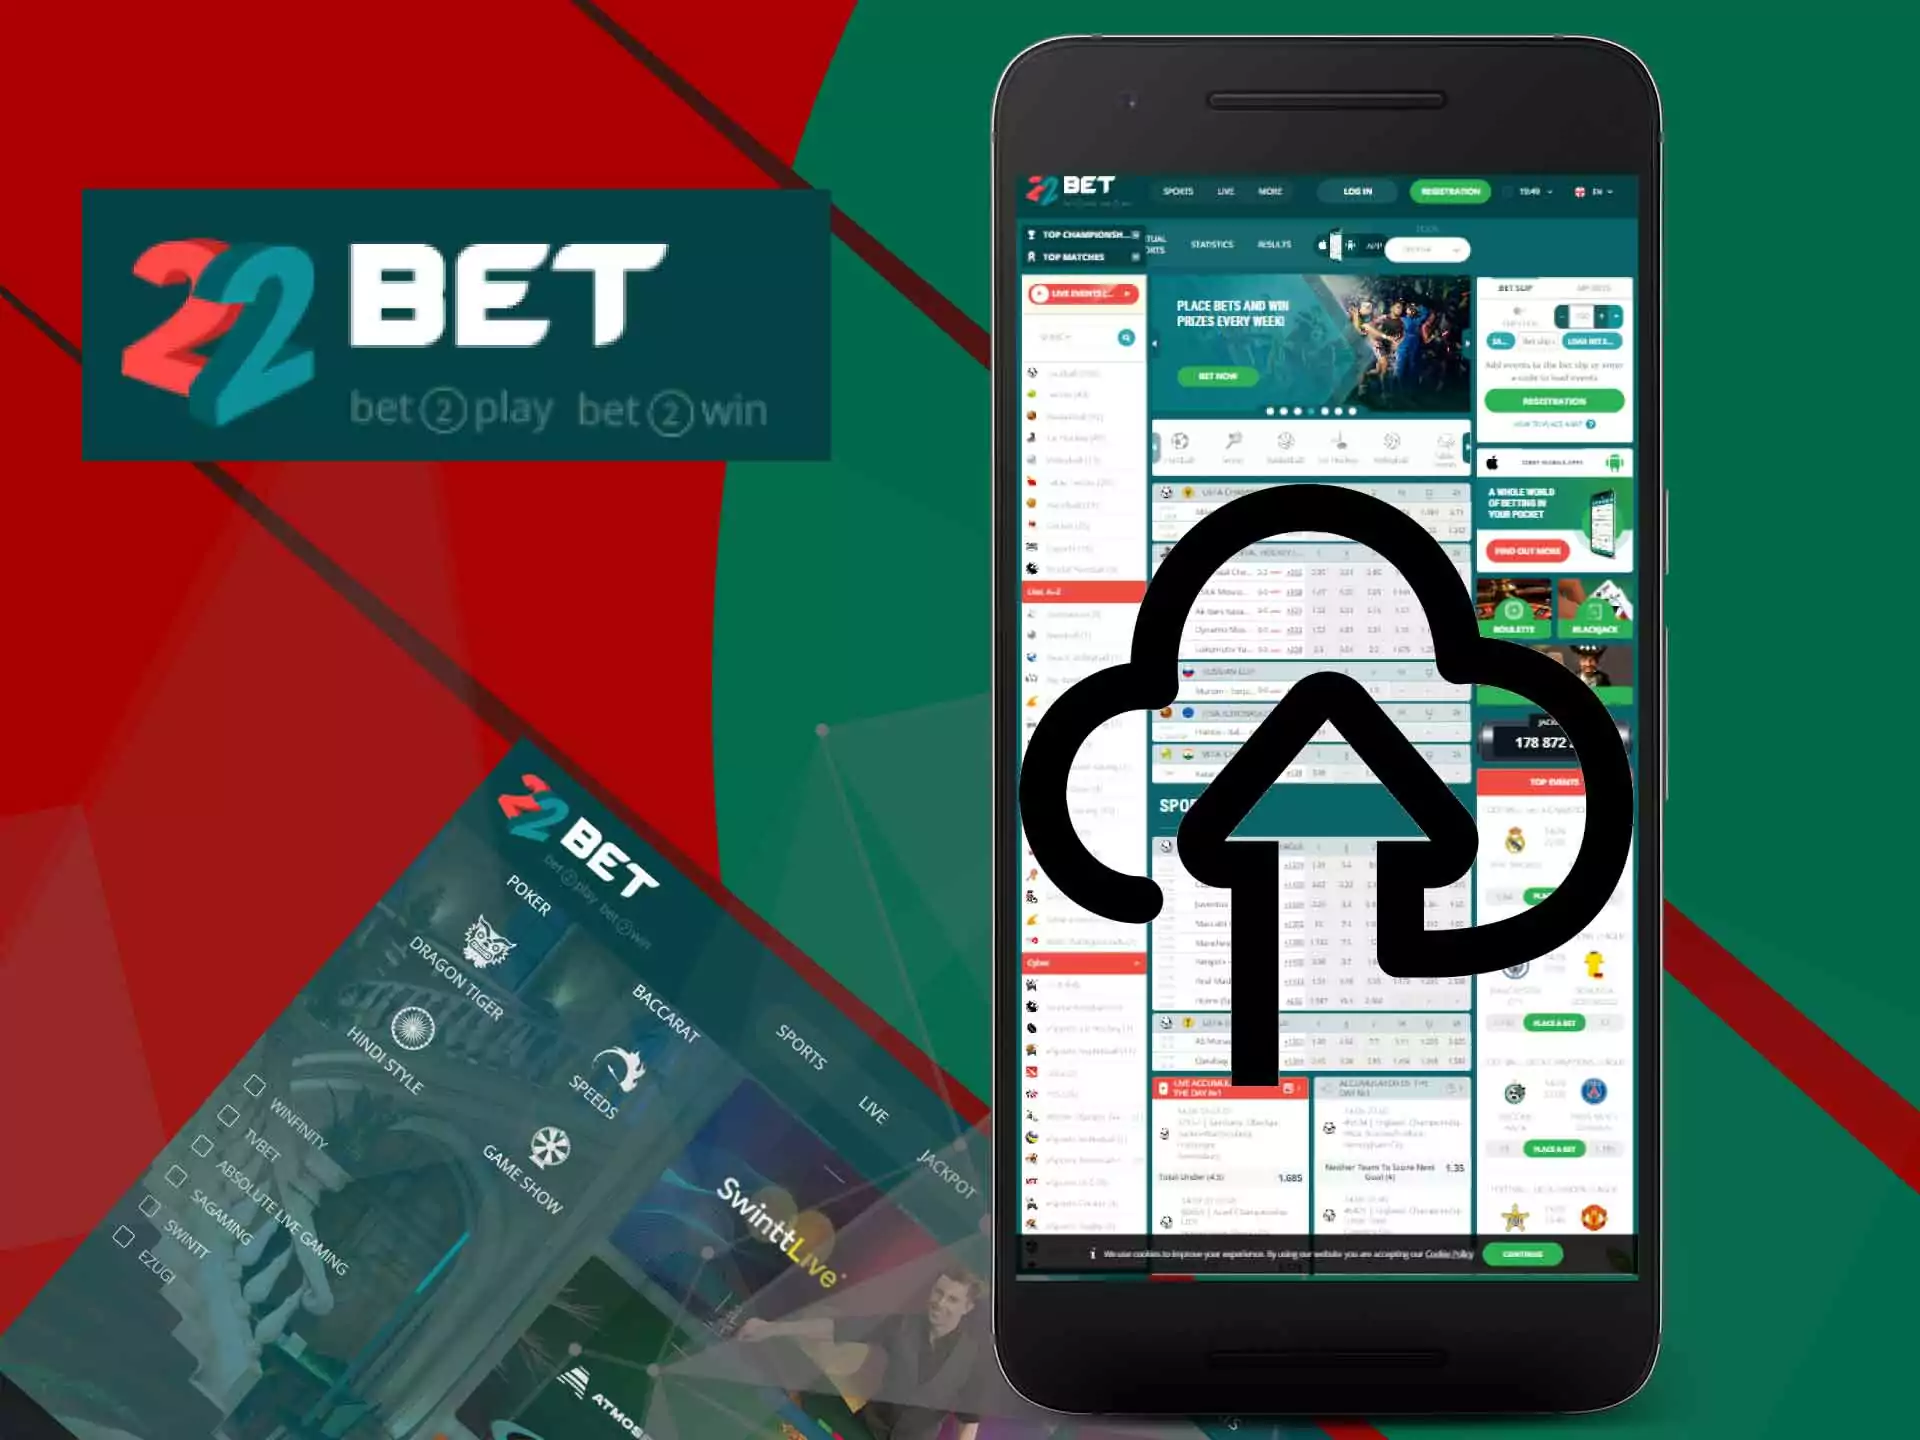 The 22Bet app updates automatically and doesn't need your attention.